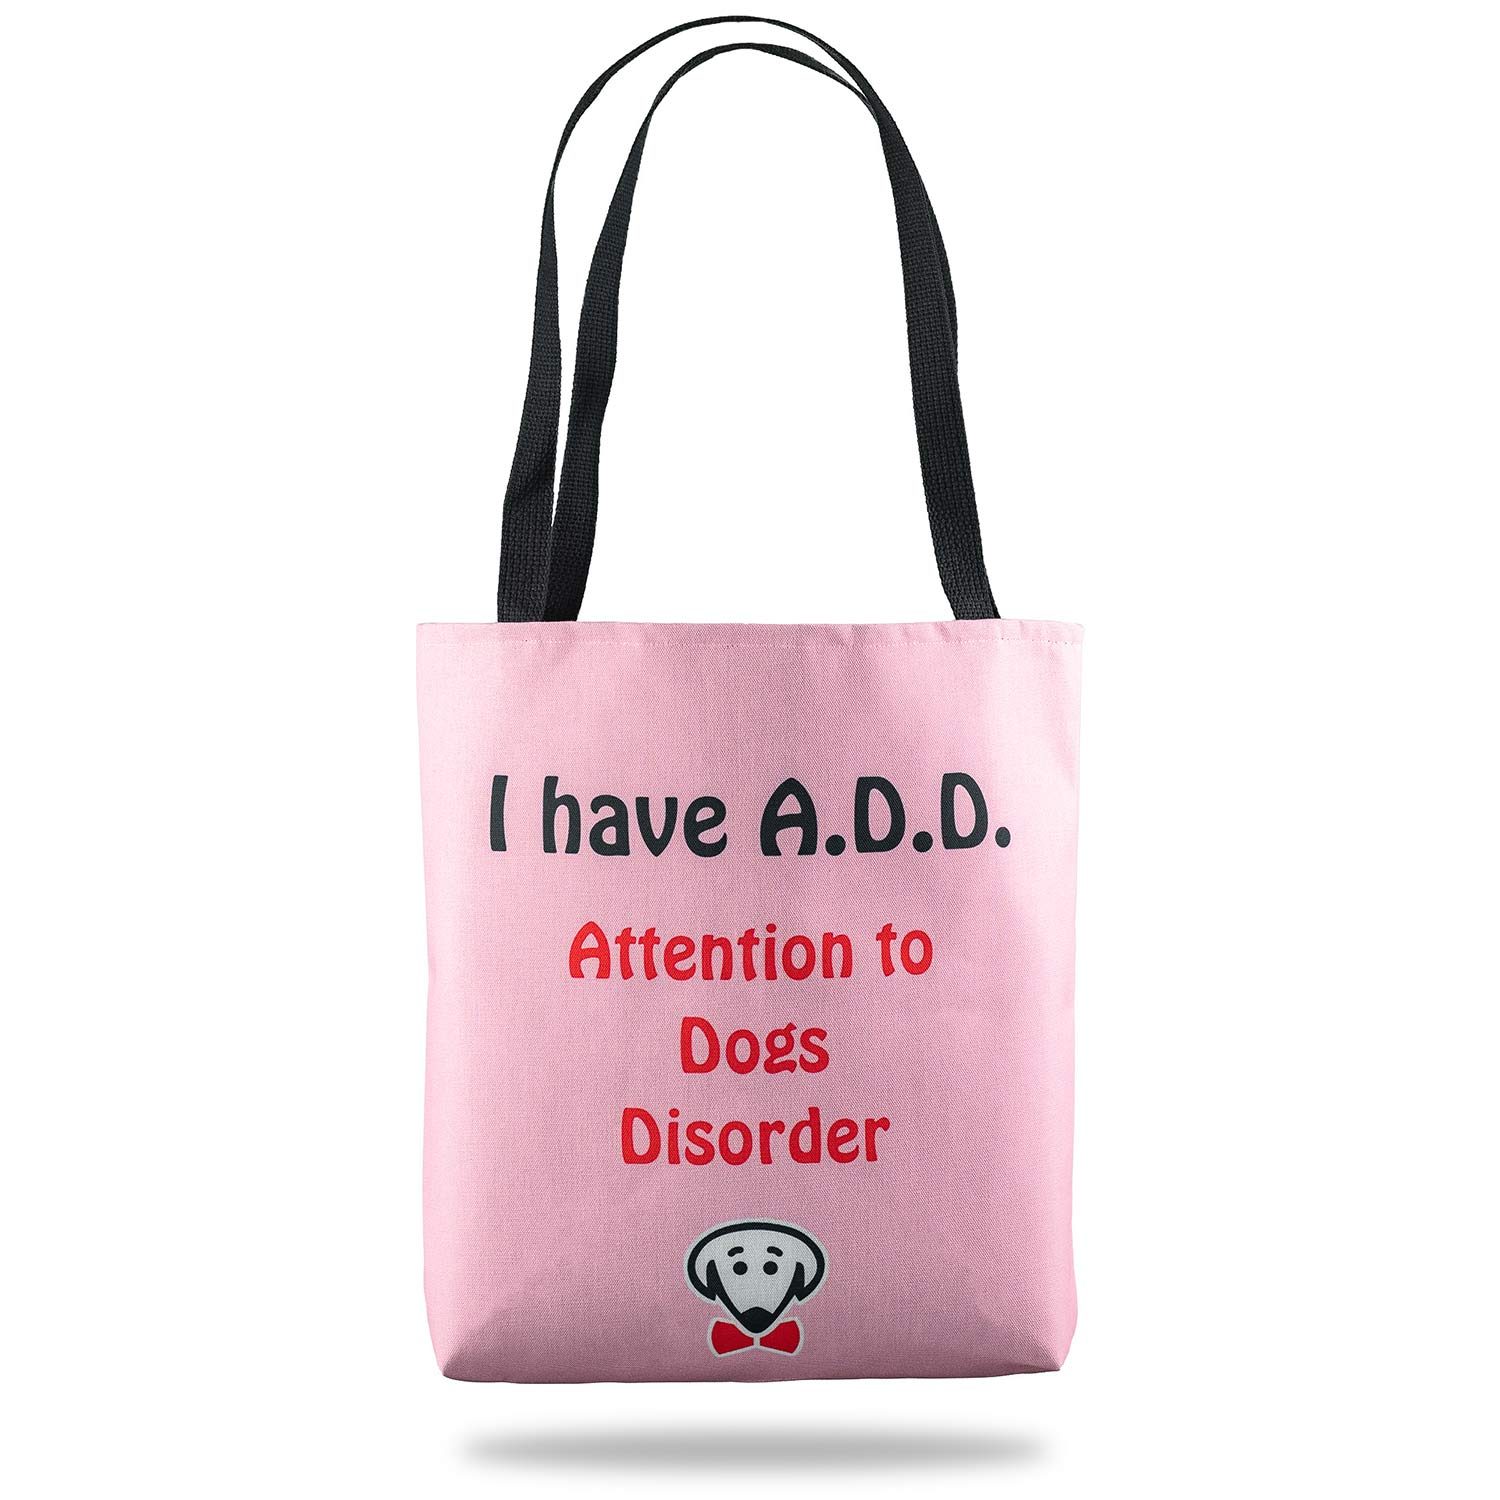 'A.D.D.' Tote by Beau Tyler in pink